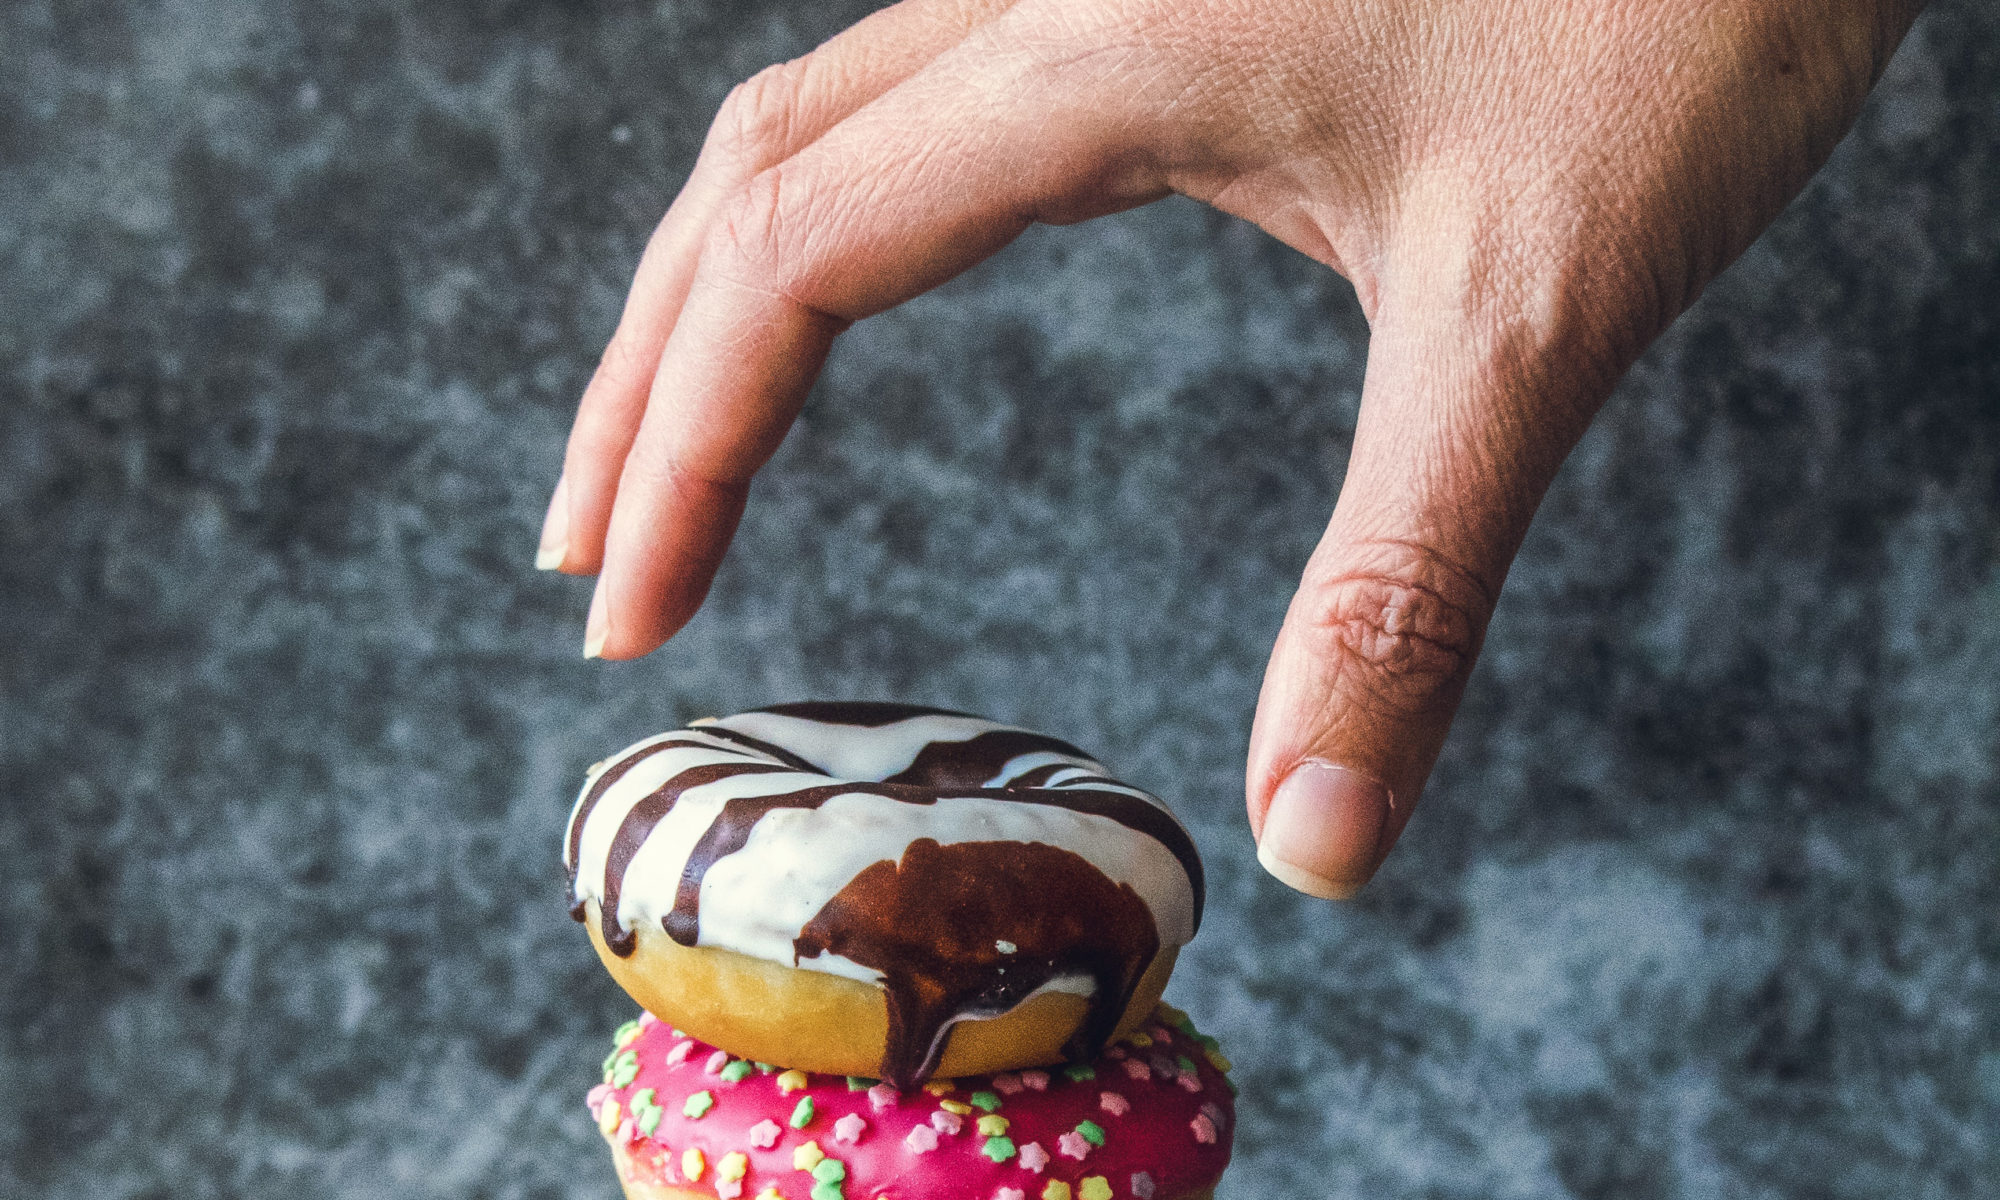 Picture of someone reaching for donut